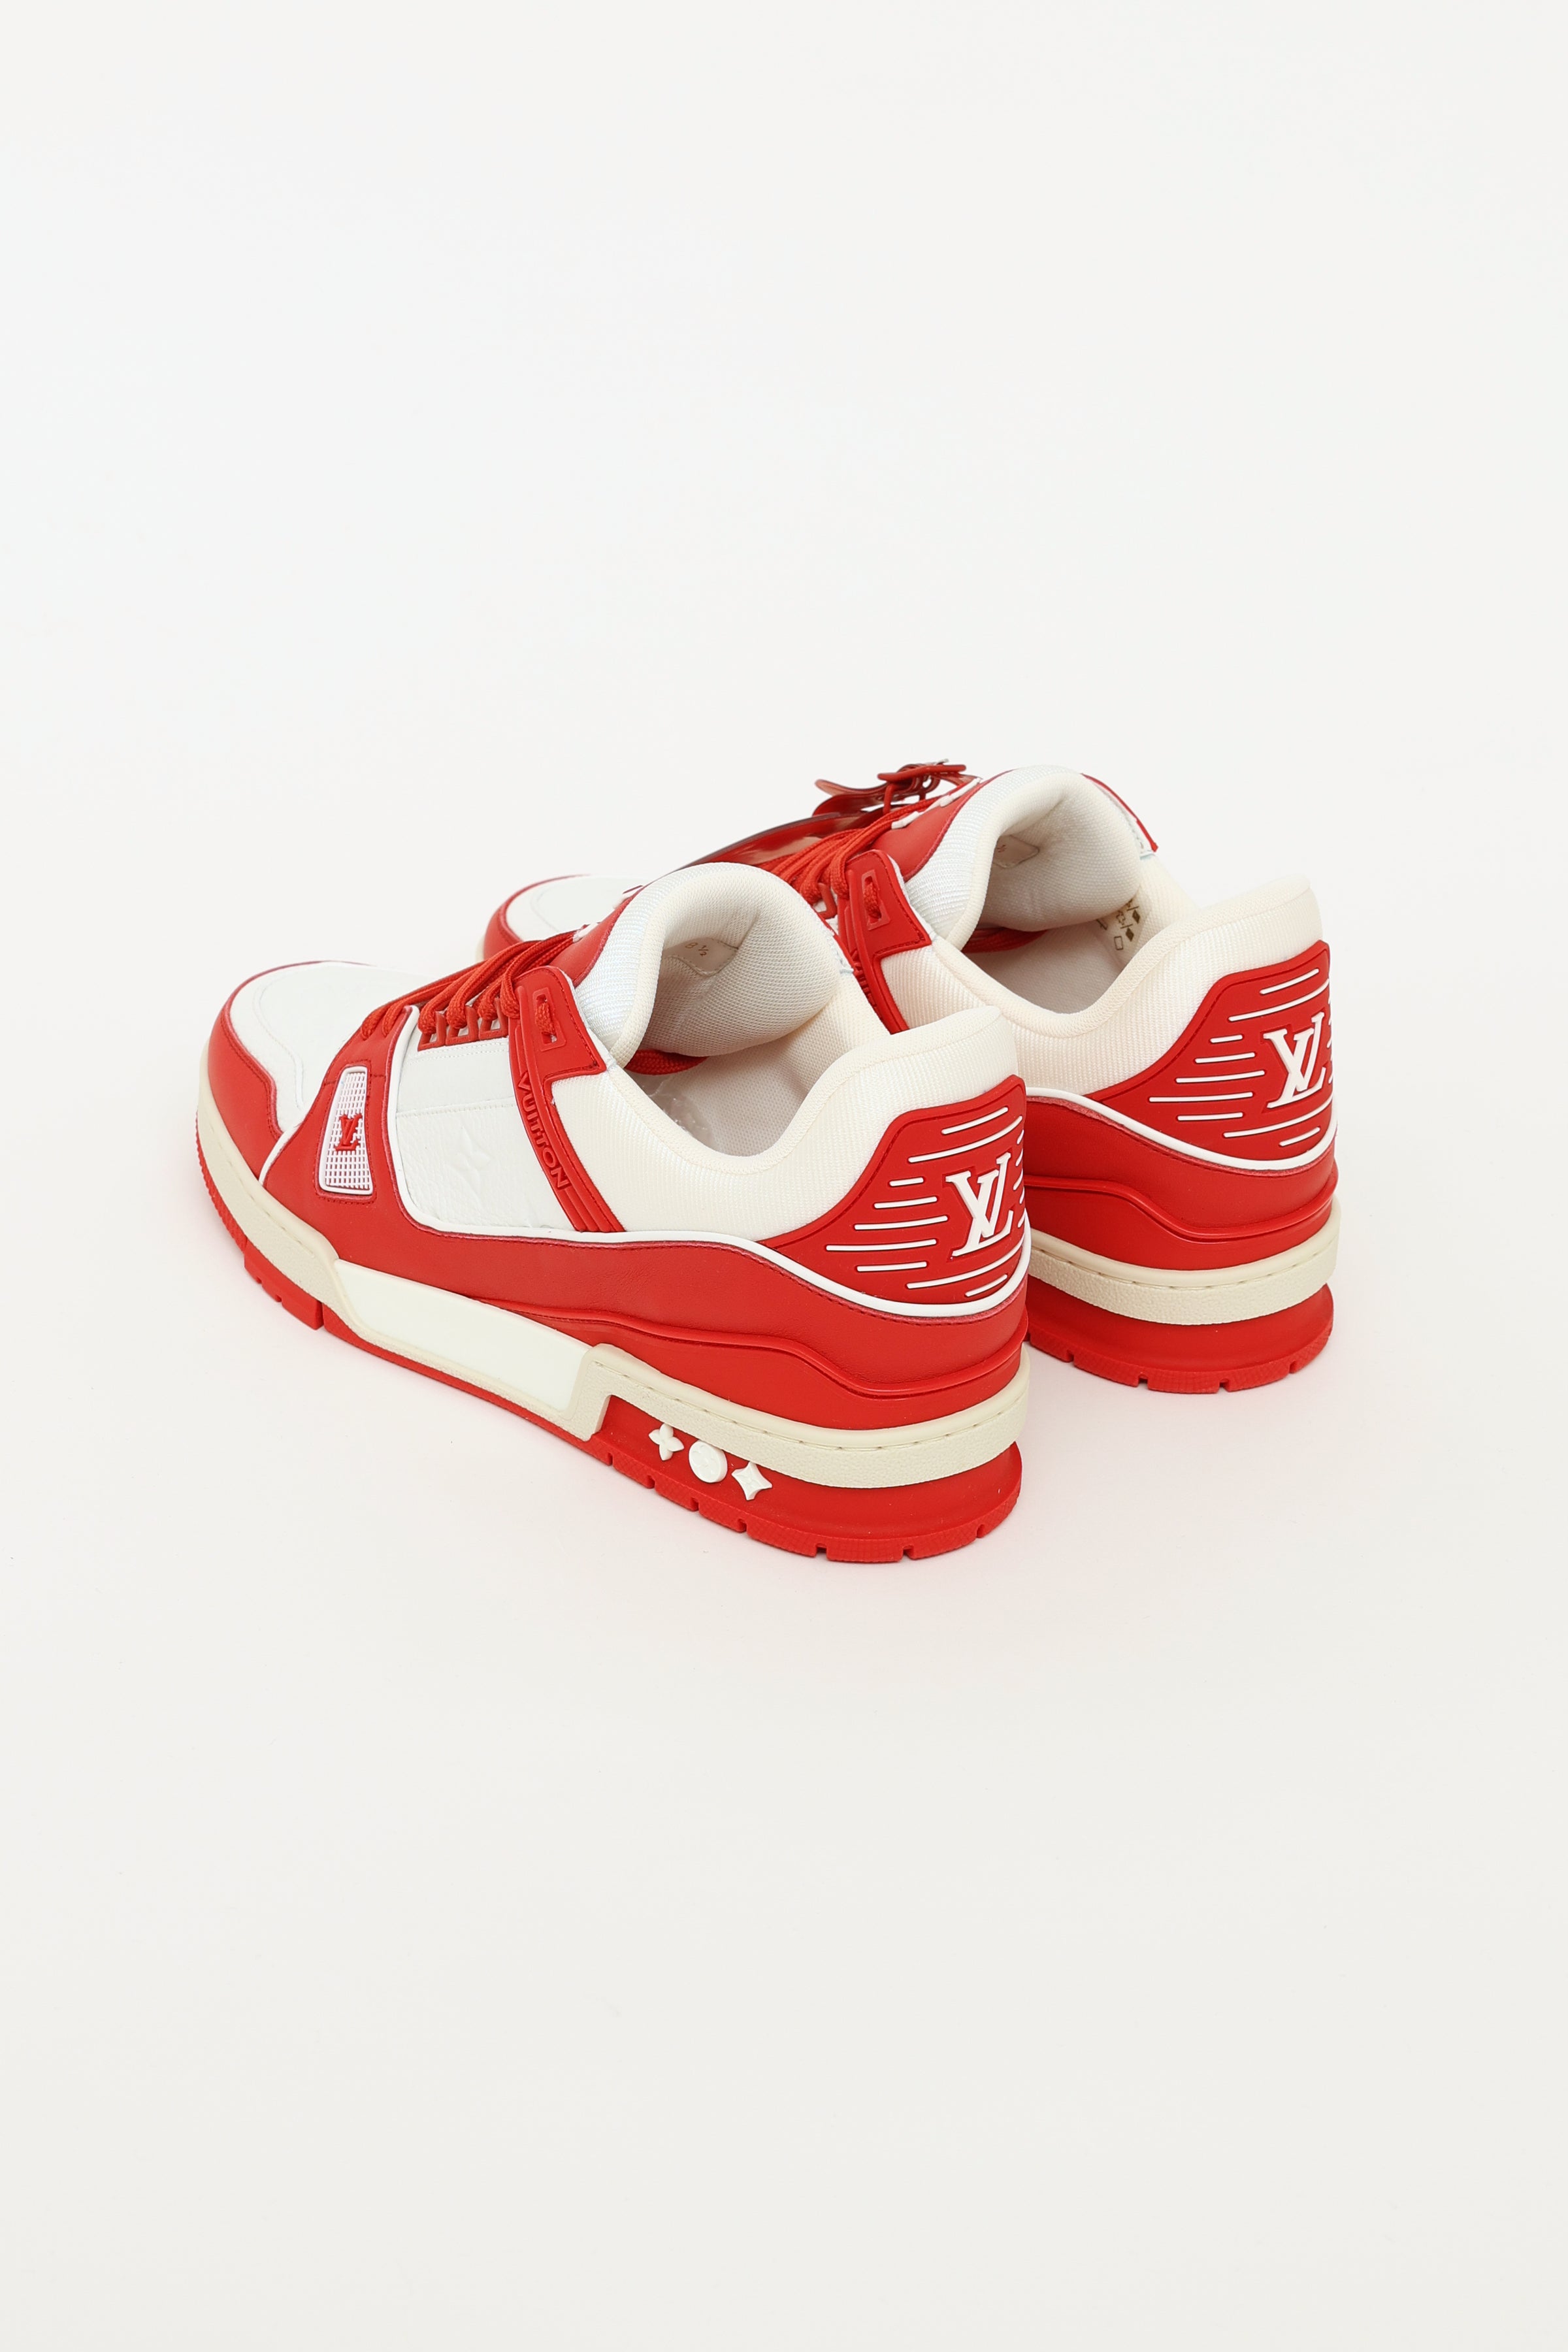 Louis Vuitton // x (RED) White and Red Project Trainer Sneaker